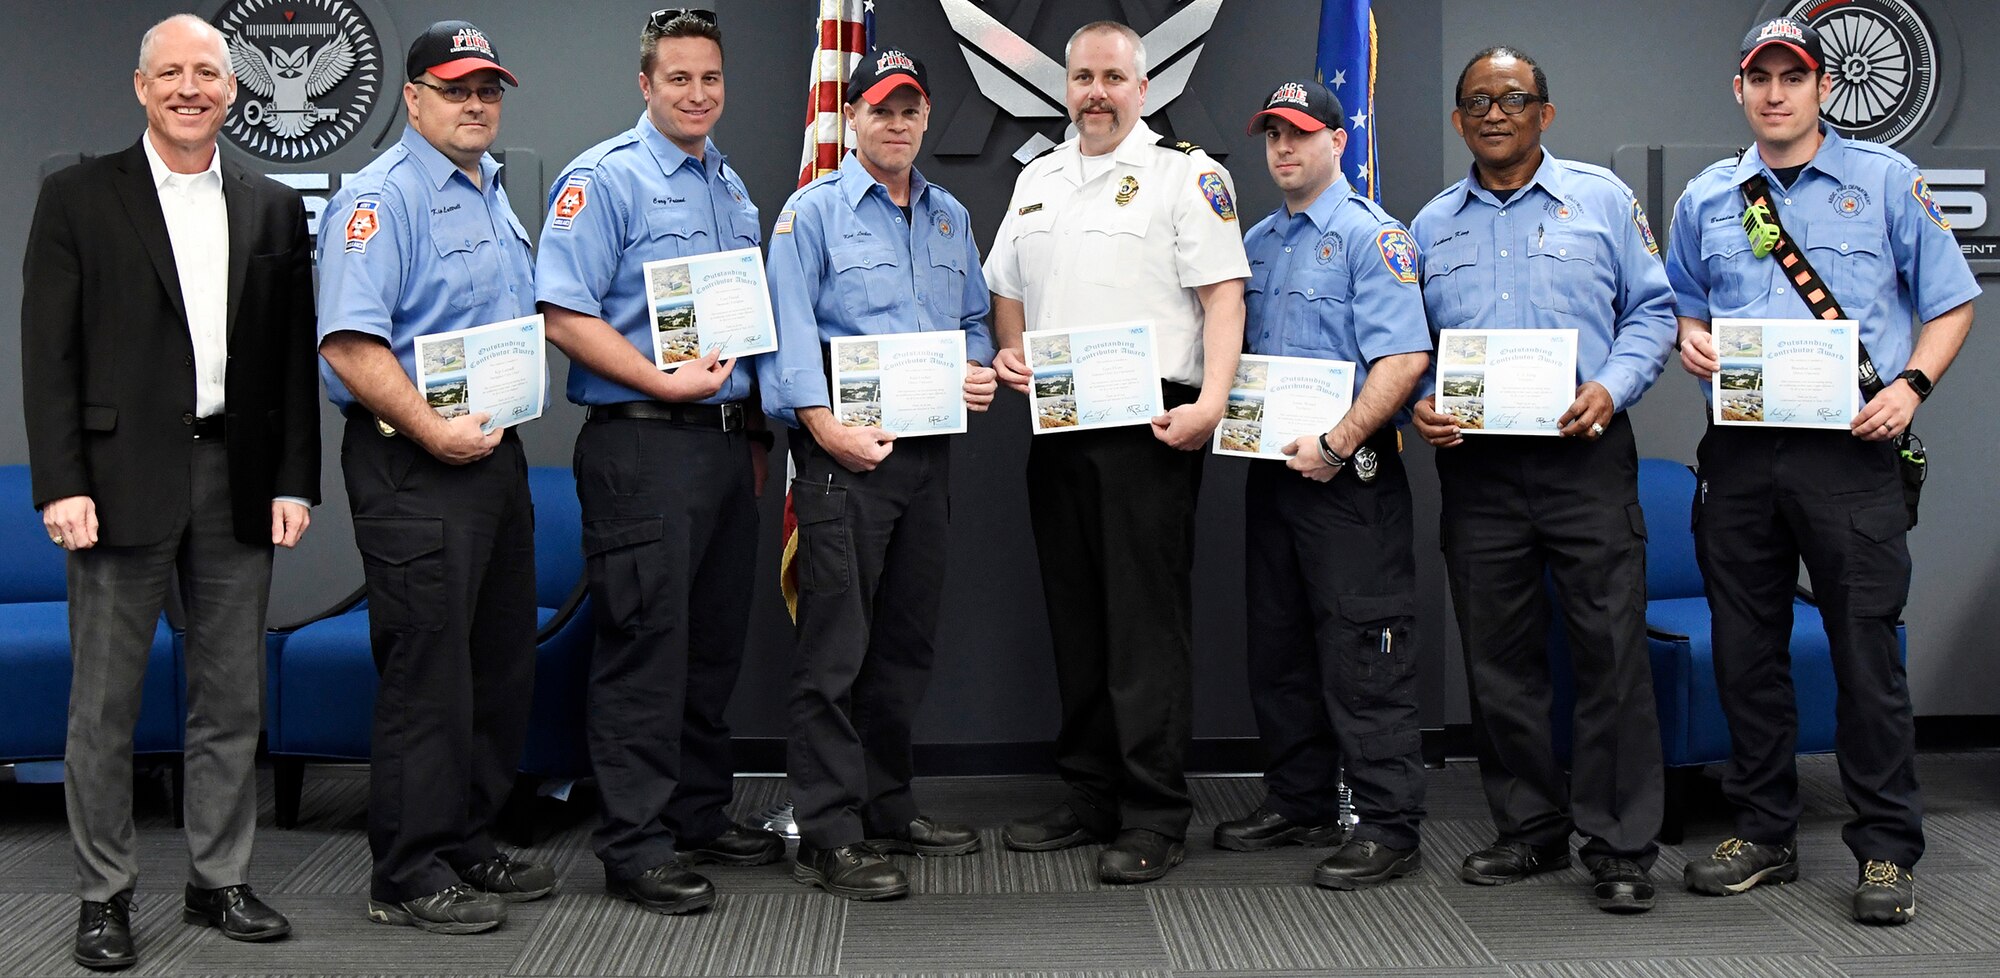 : Rich Tighe, left, general manager for the AEDC Test Operations and Sustainment contract, recognizes Arnold Air Force Base Fire and Emergency Services team members March 8 for their response to a recent sandblasting incident when a TOS team member sustained an injury. Tighe presented certificates thanking the team for their “responsiveness and decision-making” which “made a major difference in the life of one of our employees.” Also pictured from left, are Facility Support Services contract FE Services team members: Firefighter Crew Chief Kip Luttrell, Paramedic/Firefighter Cory Friend, Driver/Operator Ken Locker, Assistant Chief for Operations Gary Horn, Firefighter Justin Wiser, Firefighter T.A. King, Driver/Operator Brandon Gunn, and not pictured Driver/Operator Roger Whitton, Paramedic/Firefighter Brian Taylor and Driver/Operator Lonnie Brown. (U.S. Air Force photo by Jill Pickett)